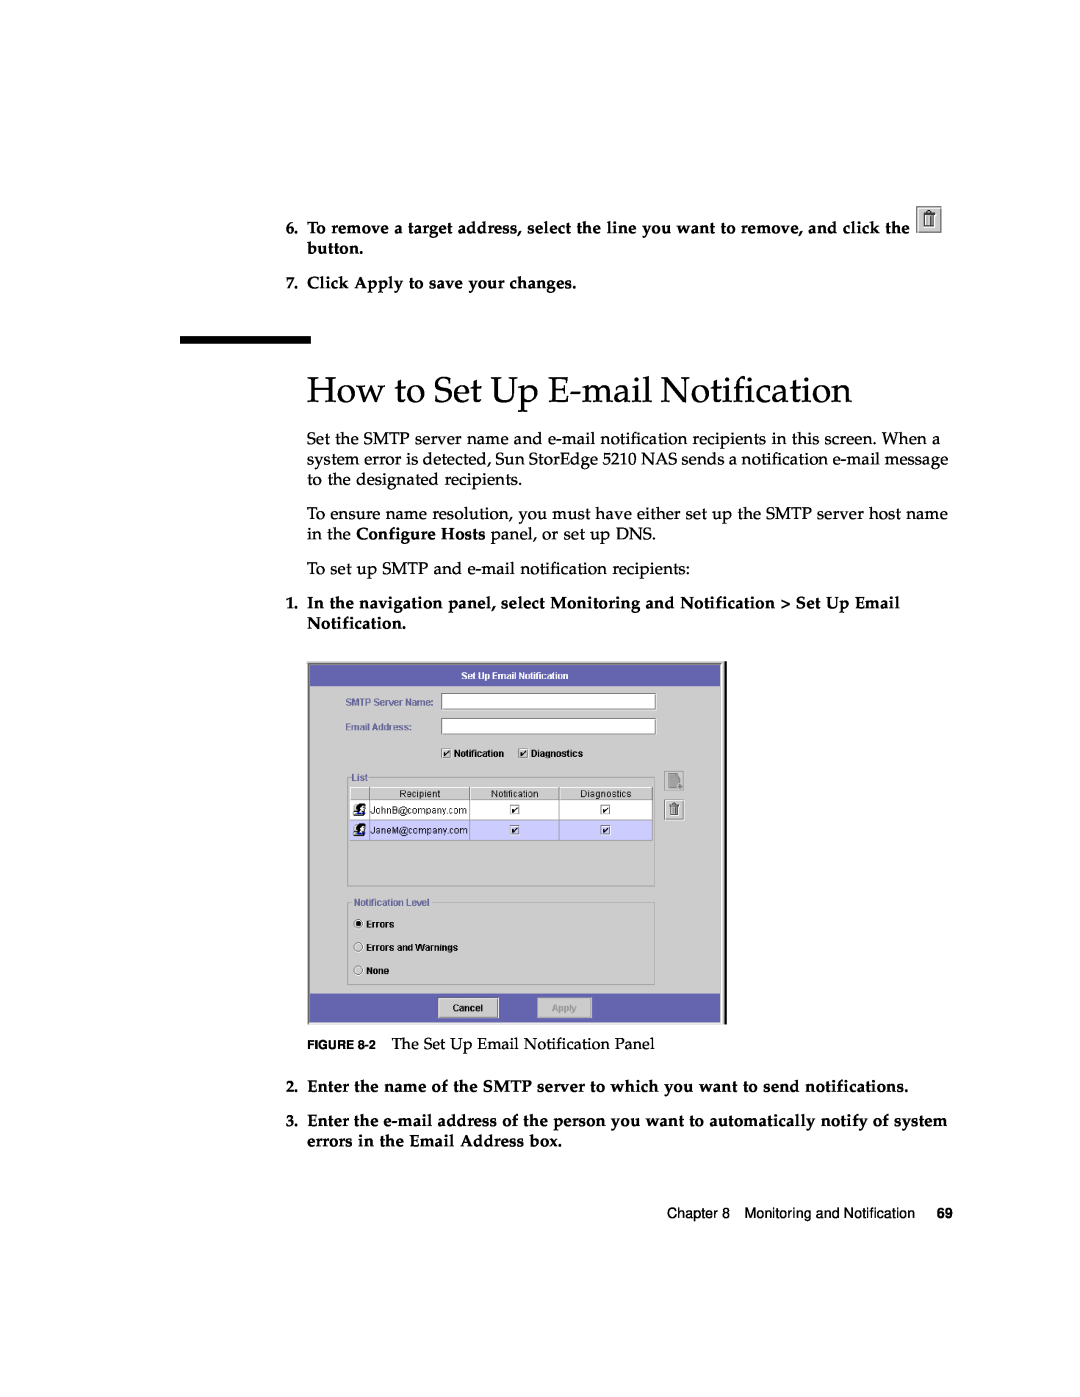 Sun Microsystems 5210 NAS manual How to Set Up E-mail Notification 